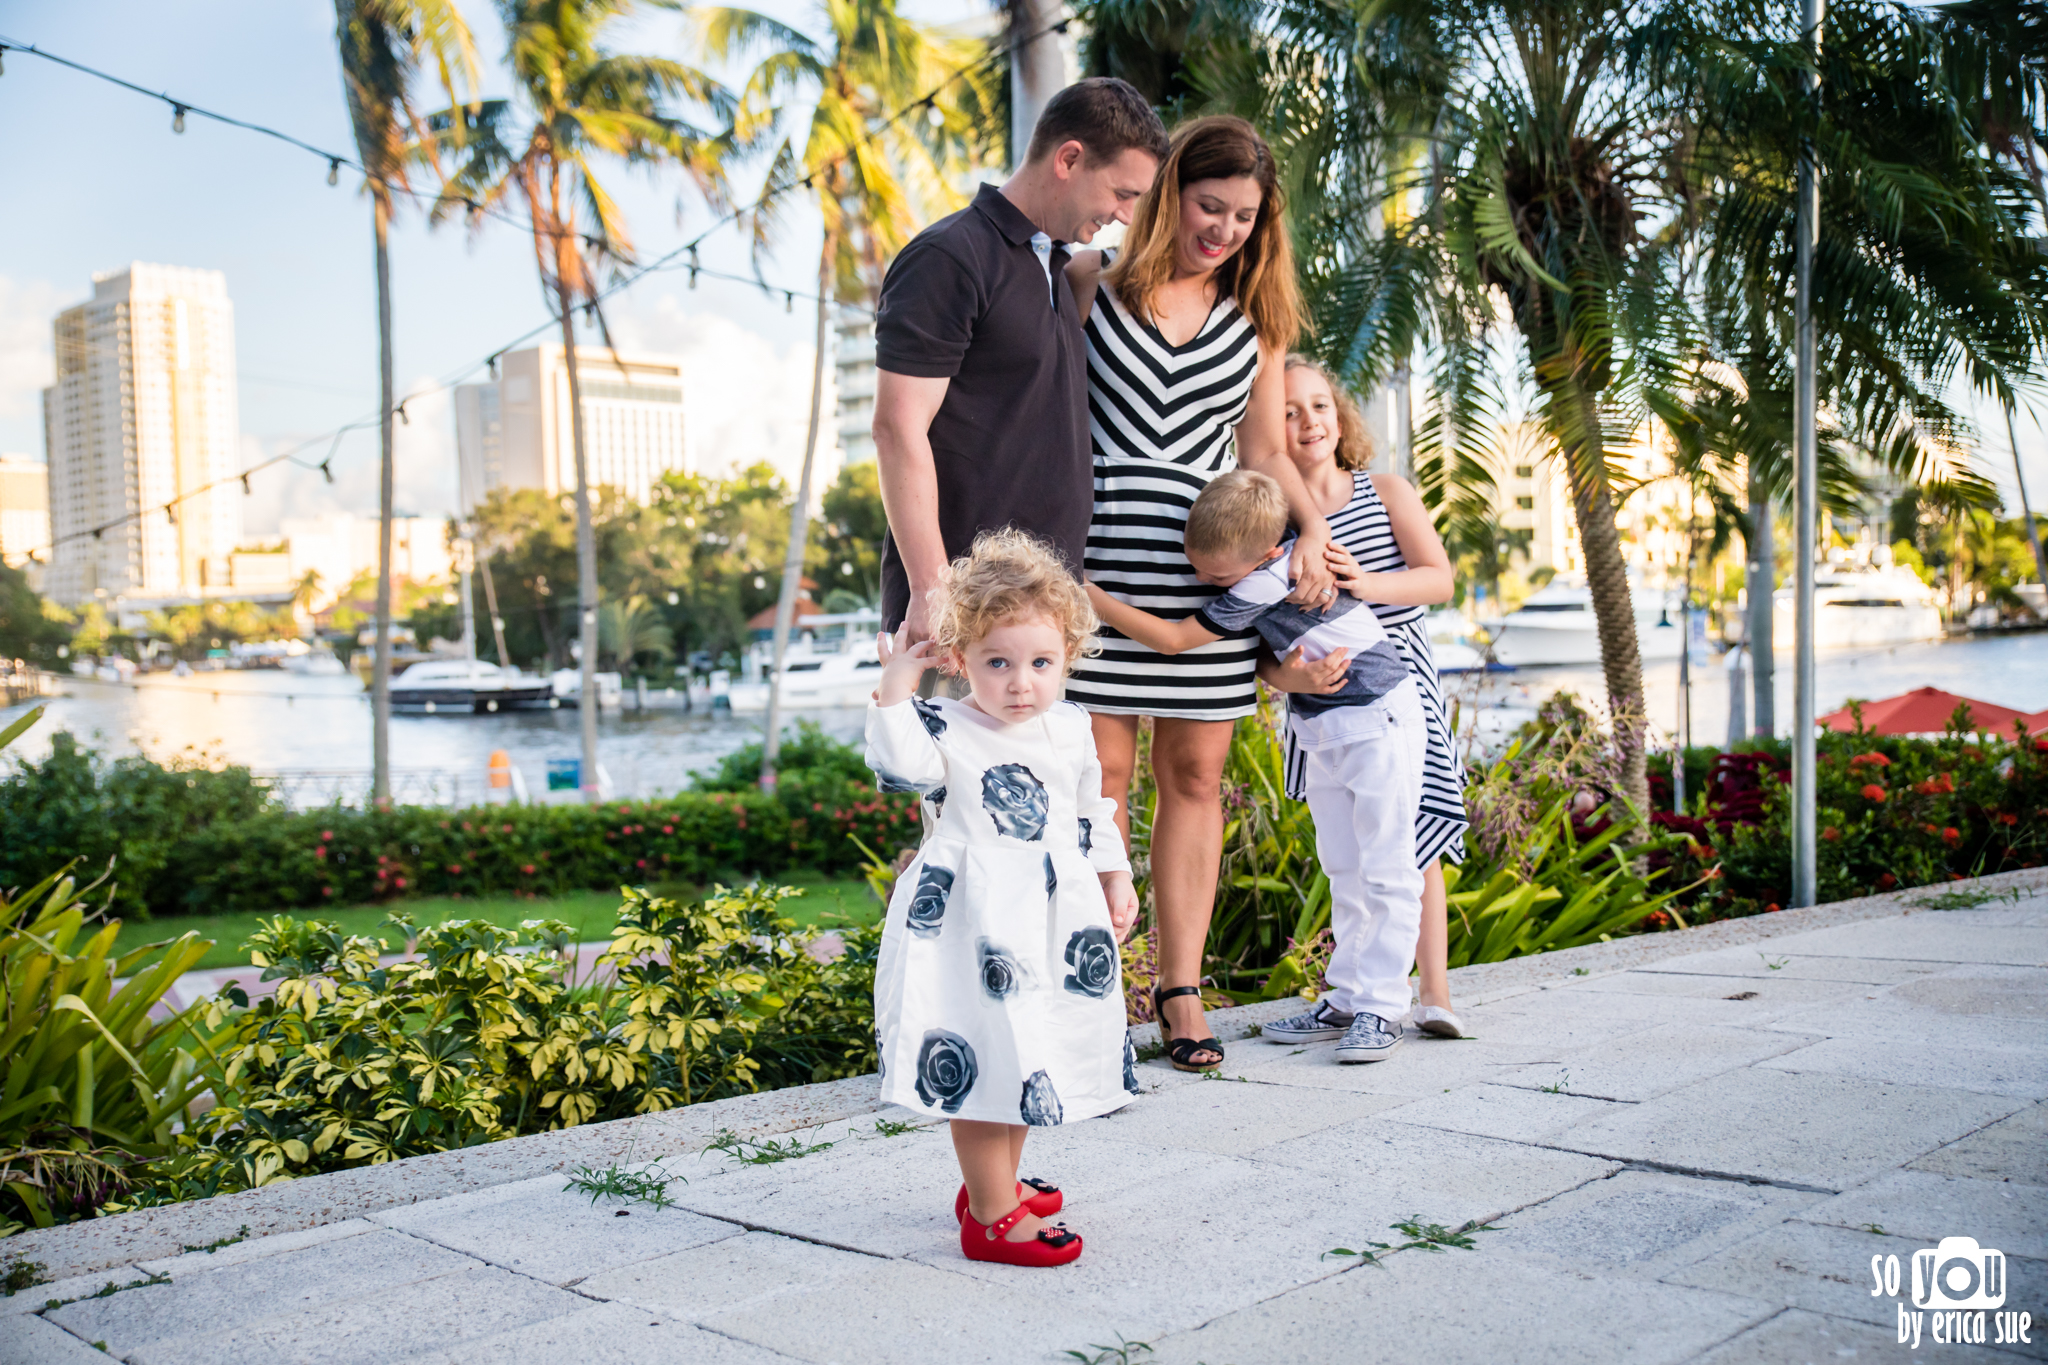 ft-lauderdale-lifestyle-family-photography-so-you-by-erica-sue-0263.jpg